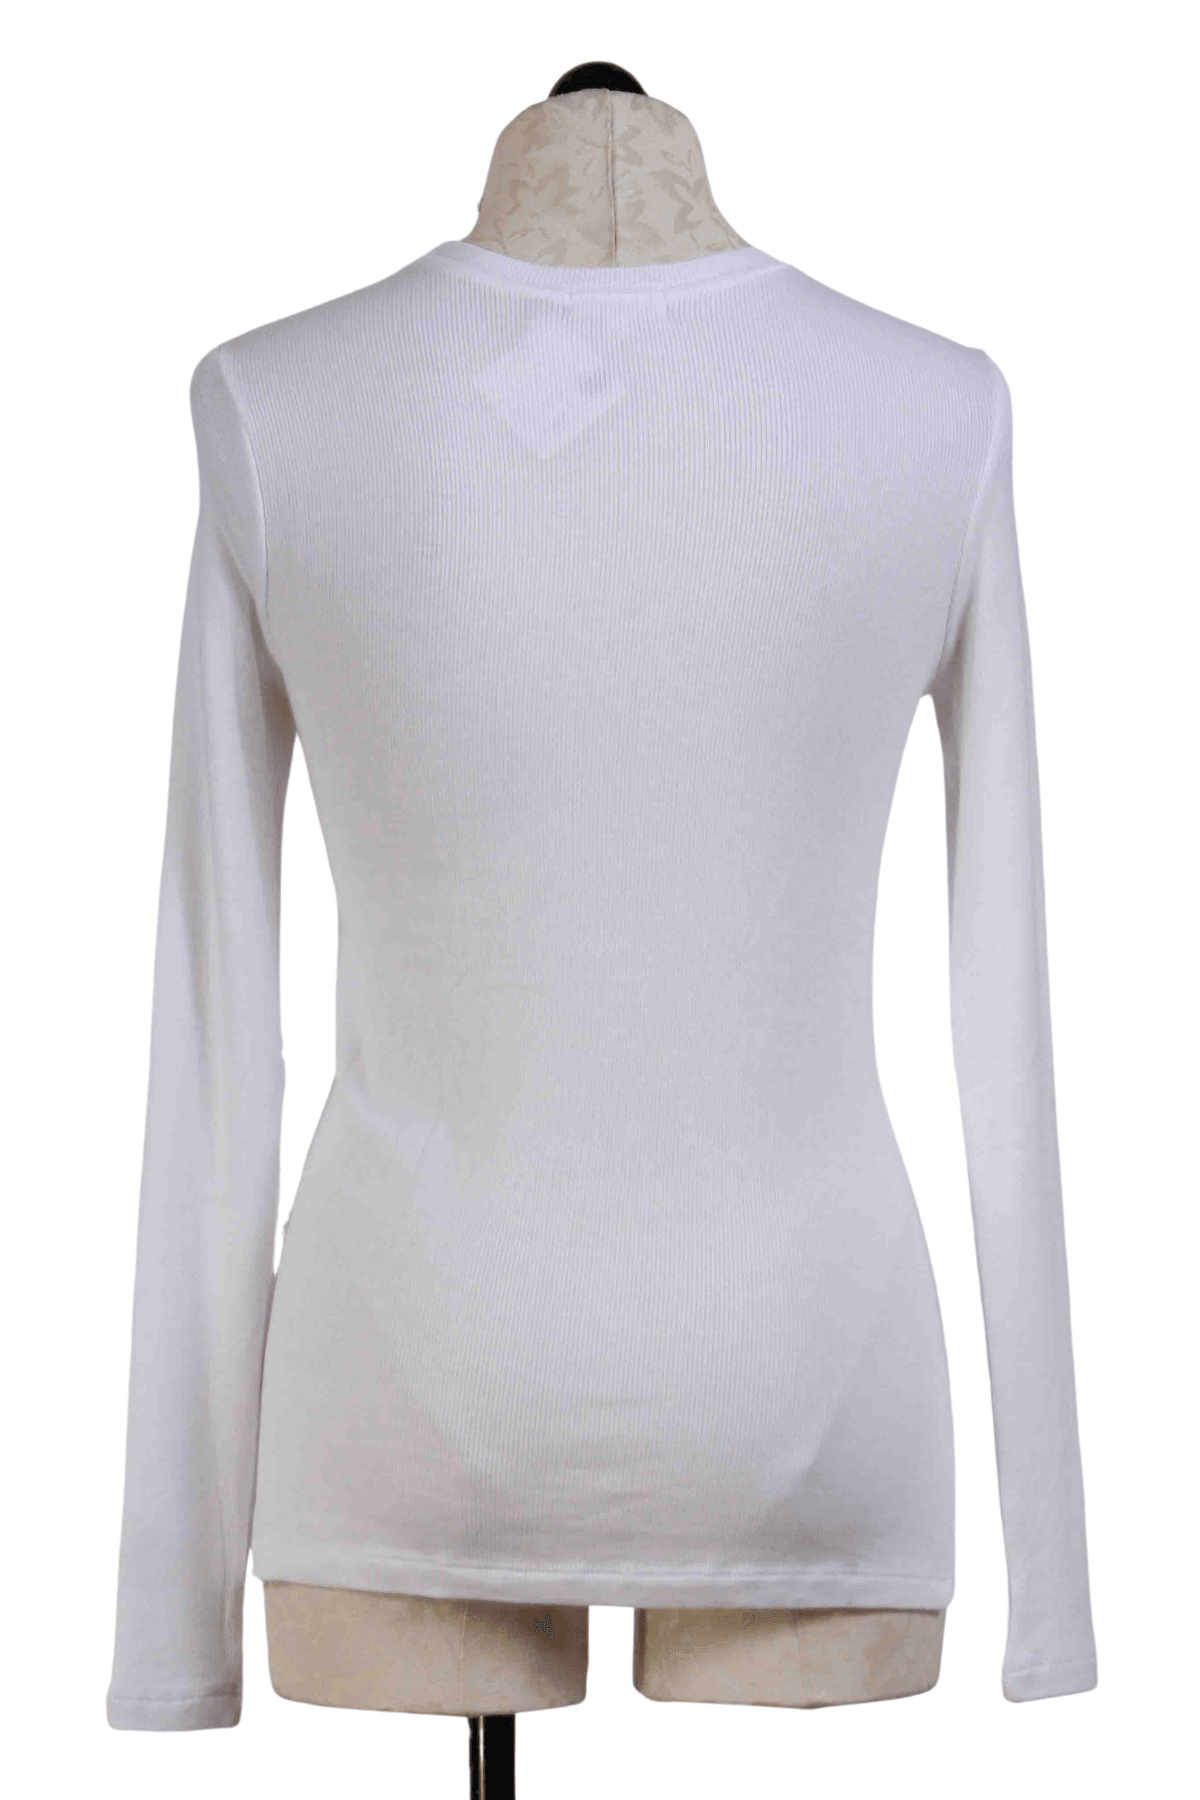 back view of white Ribbed Long Sleeve Tee by Goldie Tees